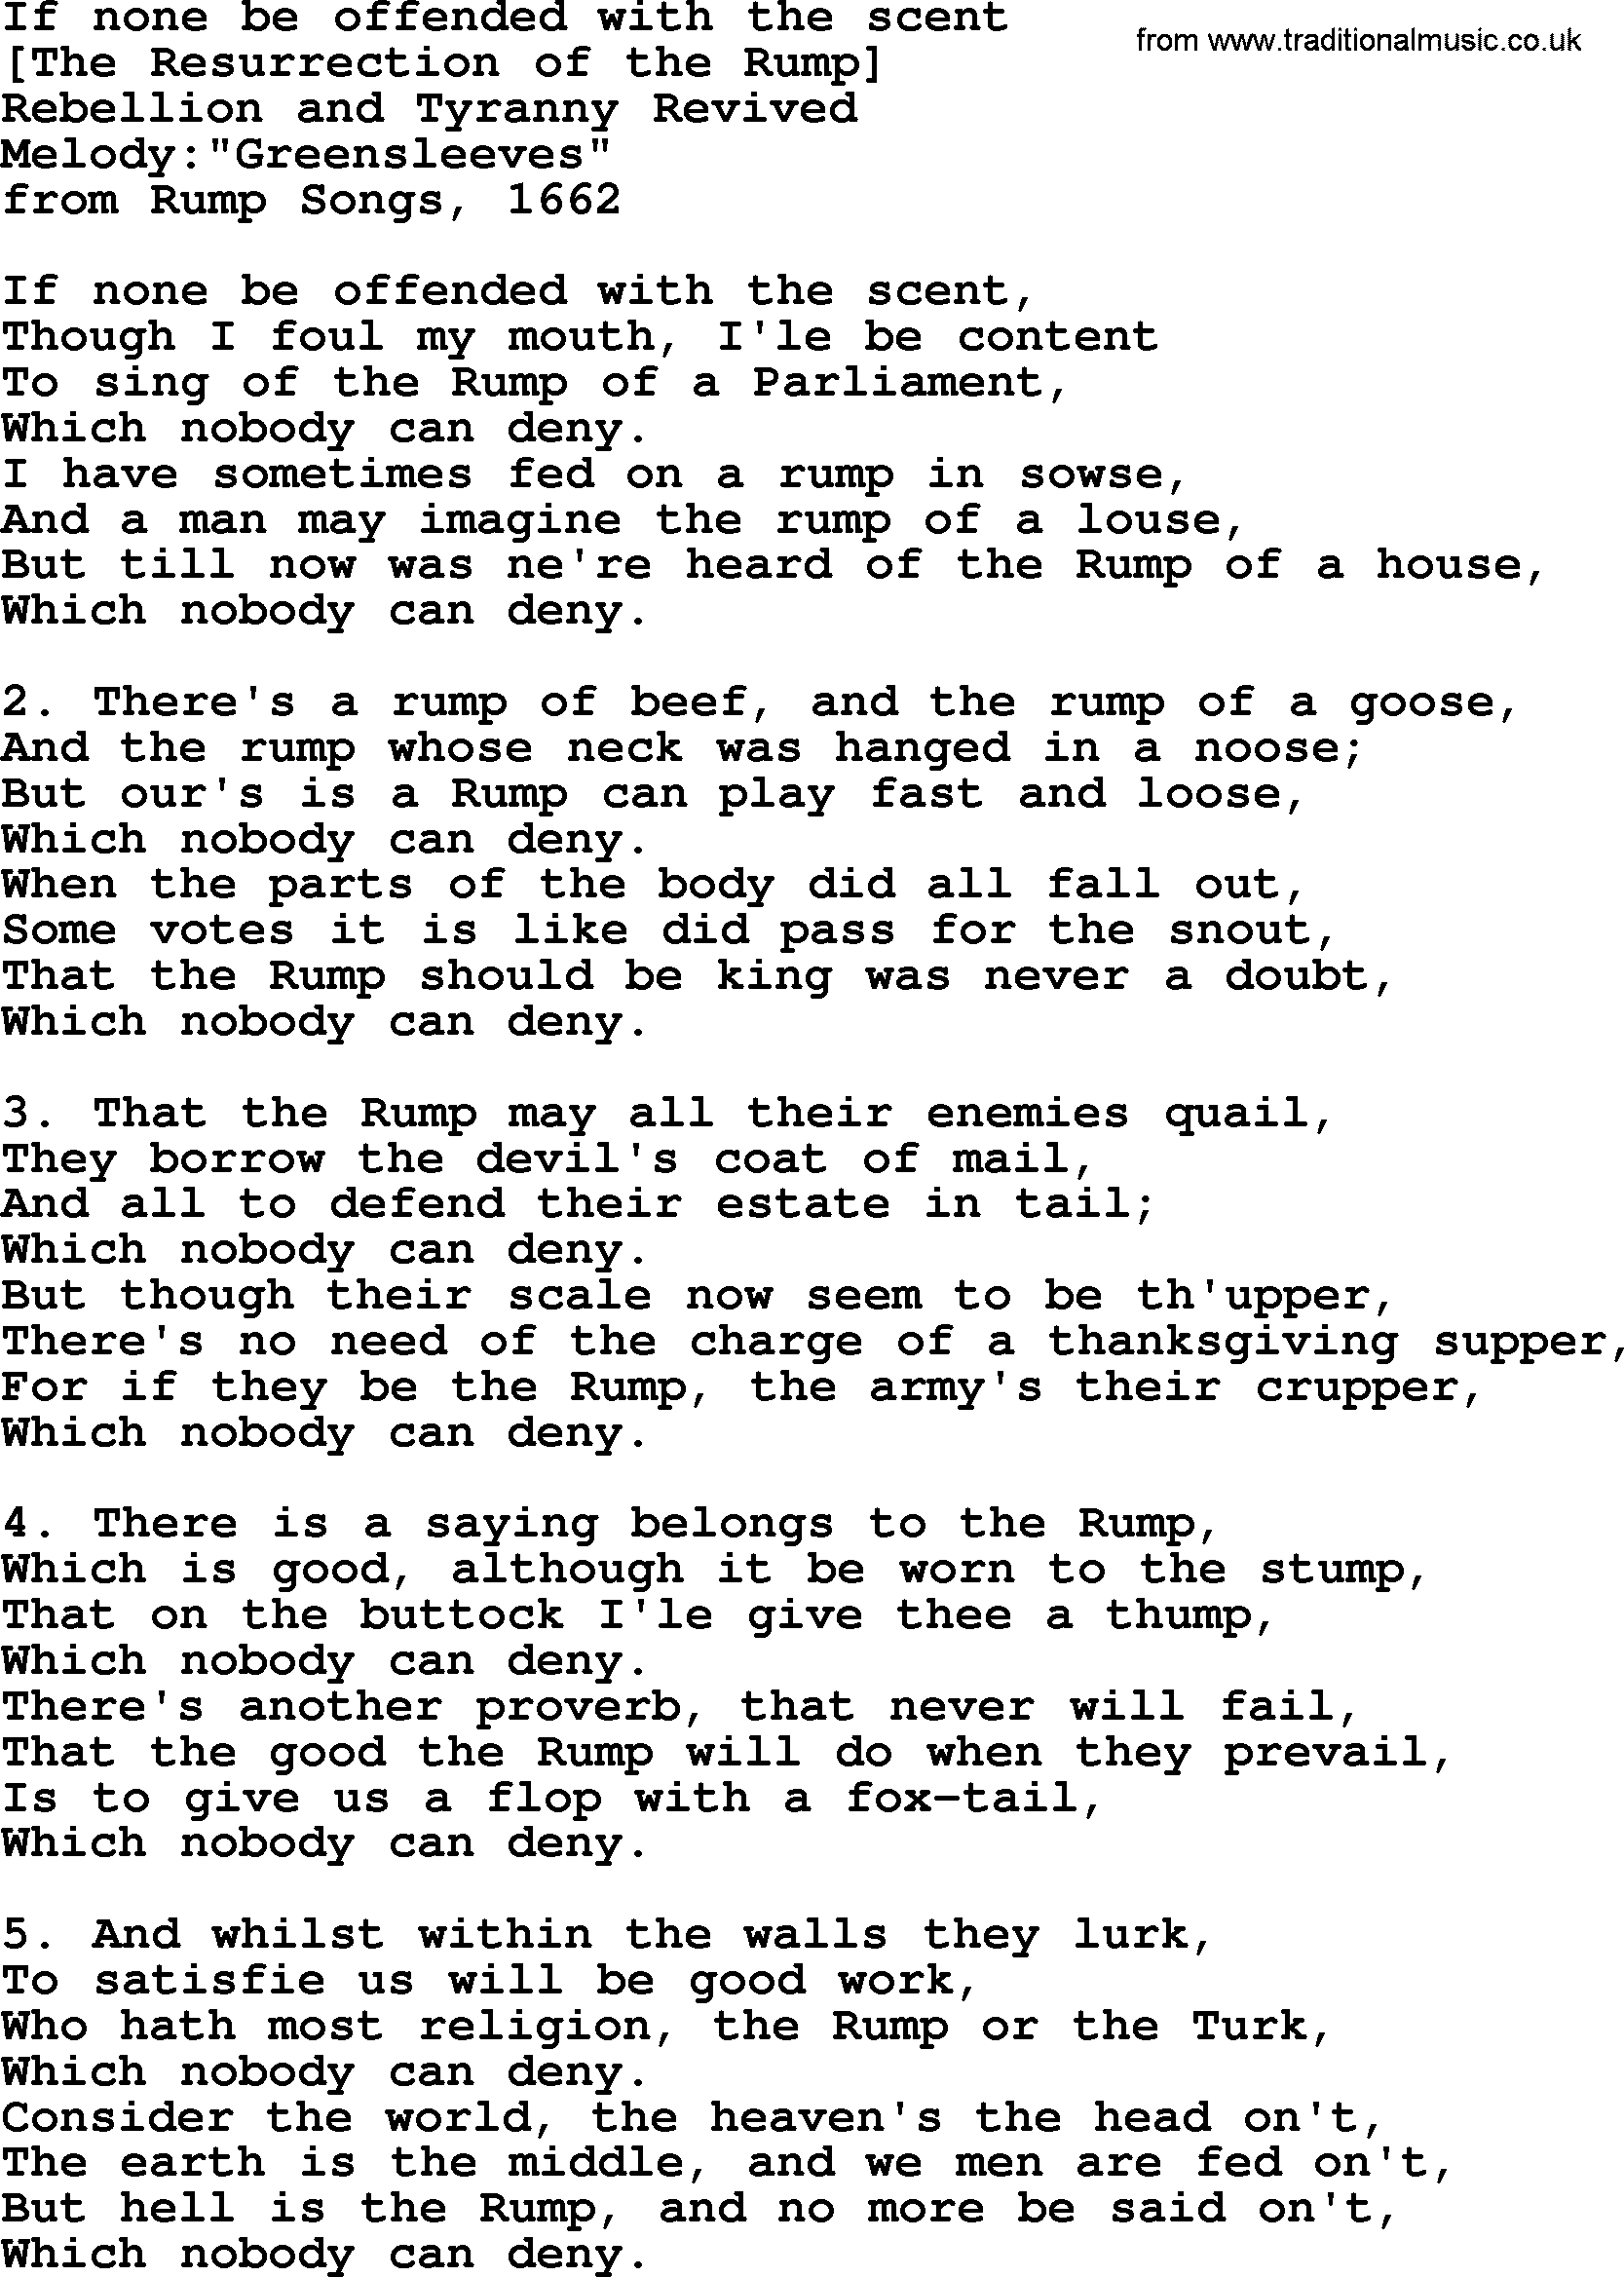 Old English Song: If None Be Offended With The Scent lyrics